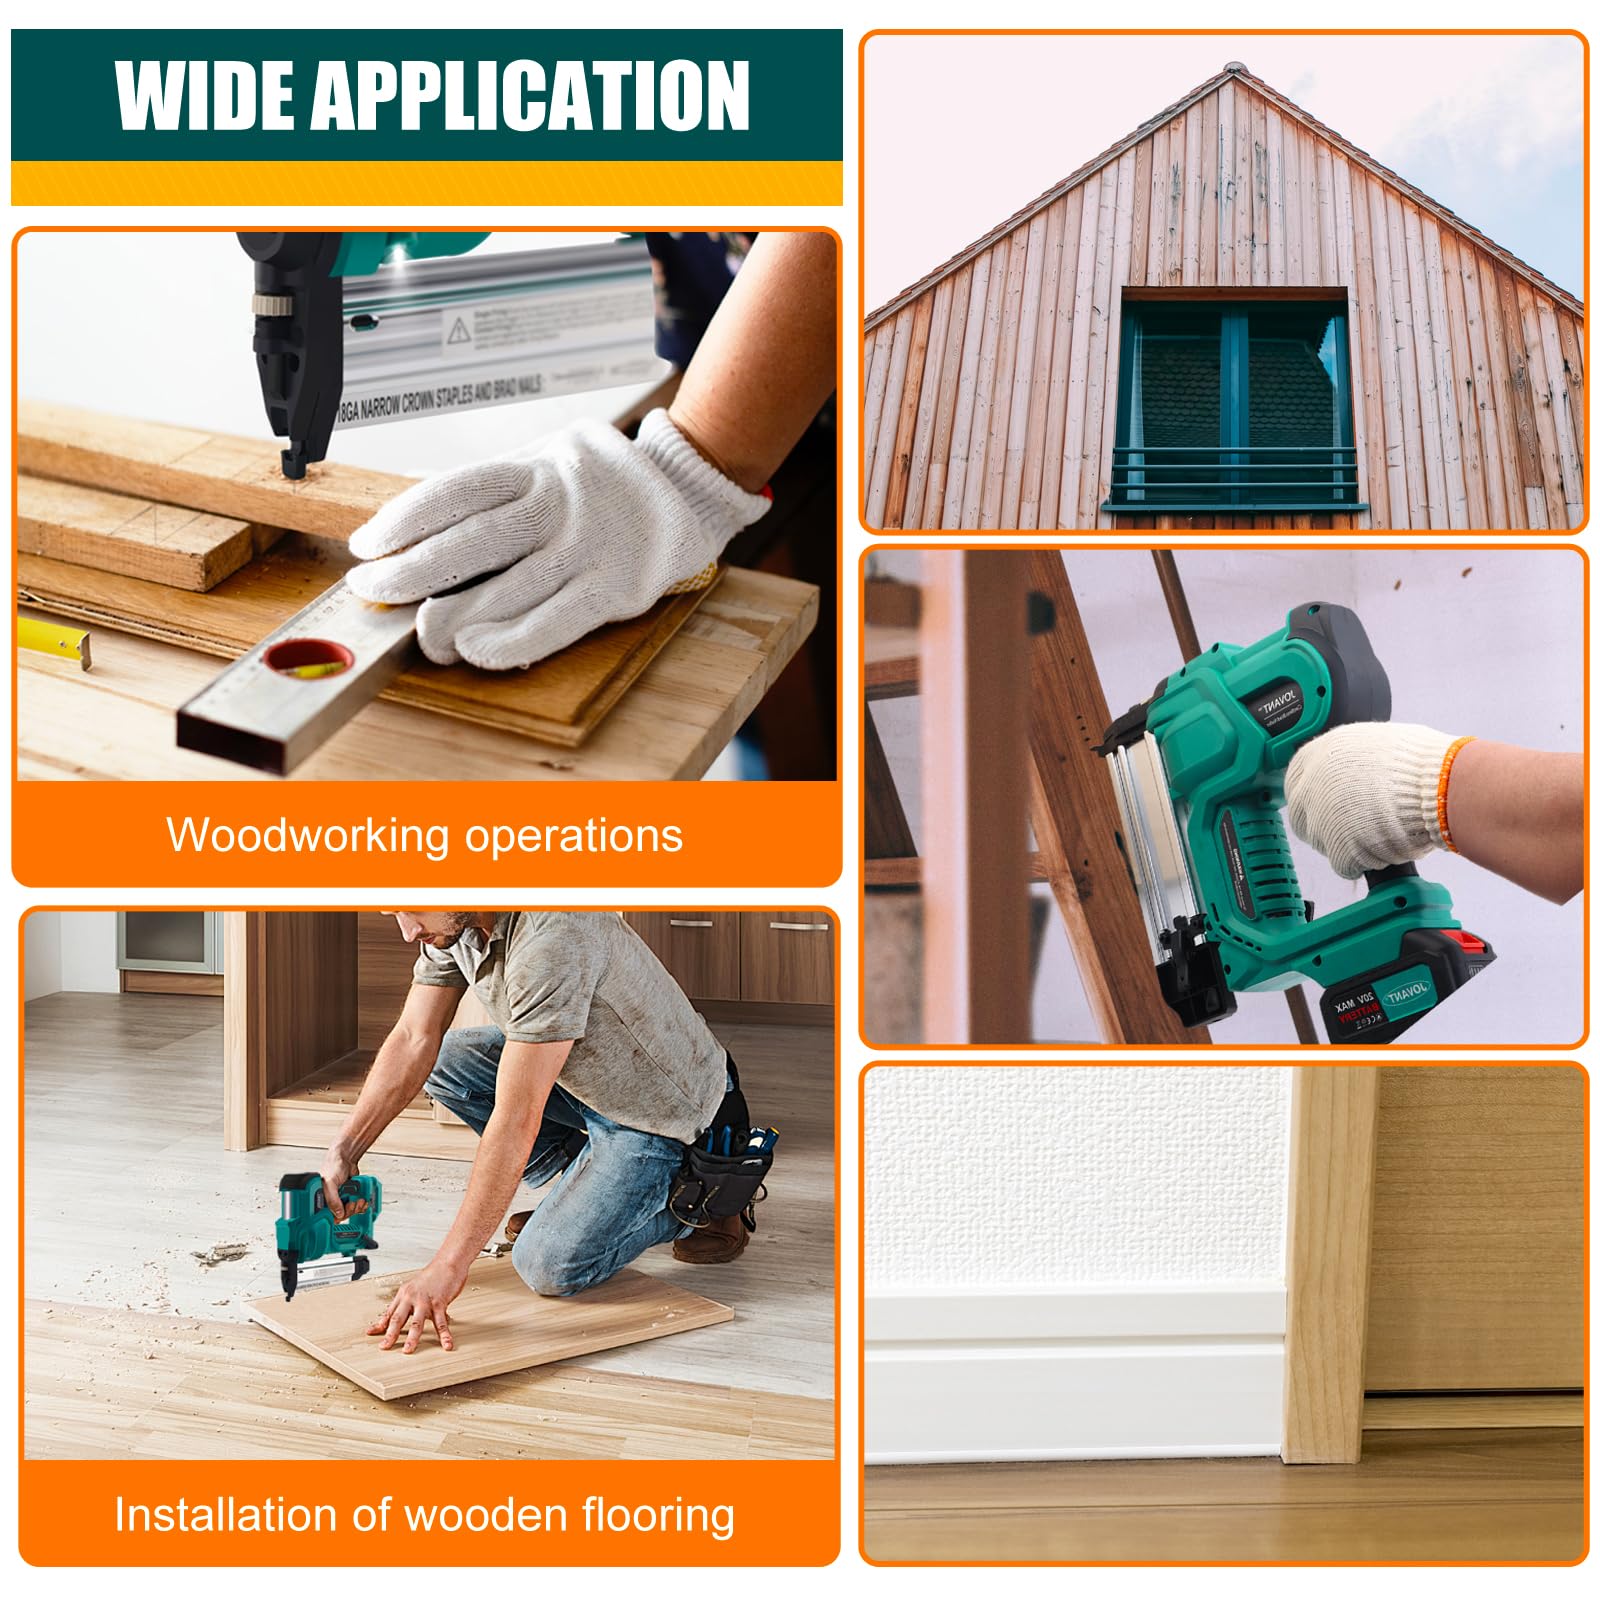 WIDE APPLICATION Woodworking operations lnstallation of wooden flooring